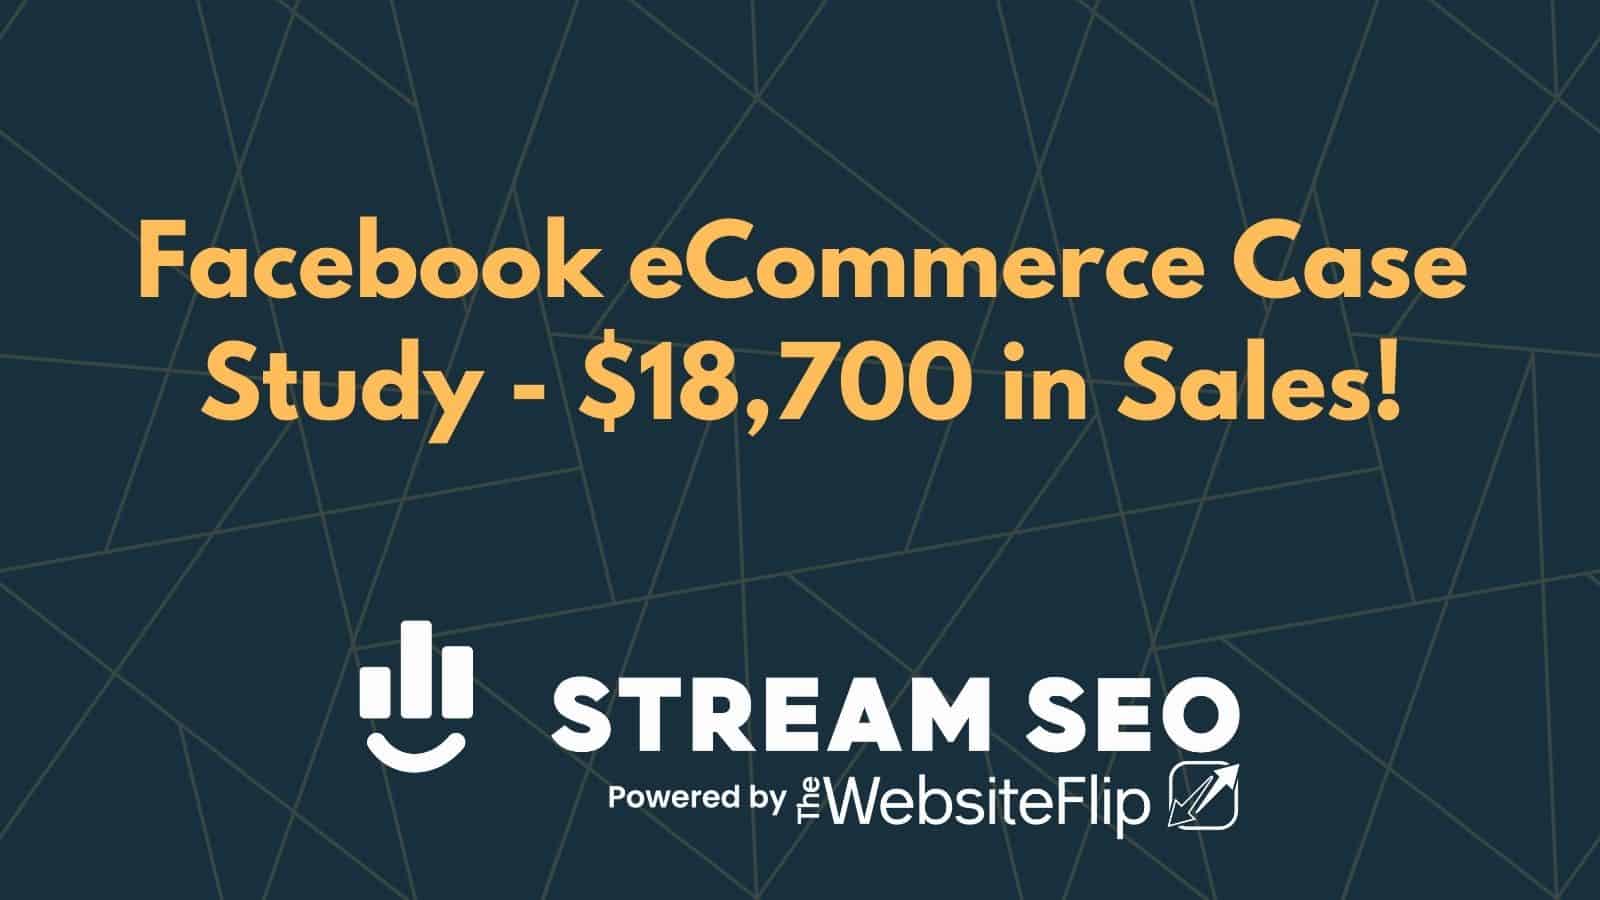 Facebook eCommerce Case Study – $18,700 in Sales!